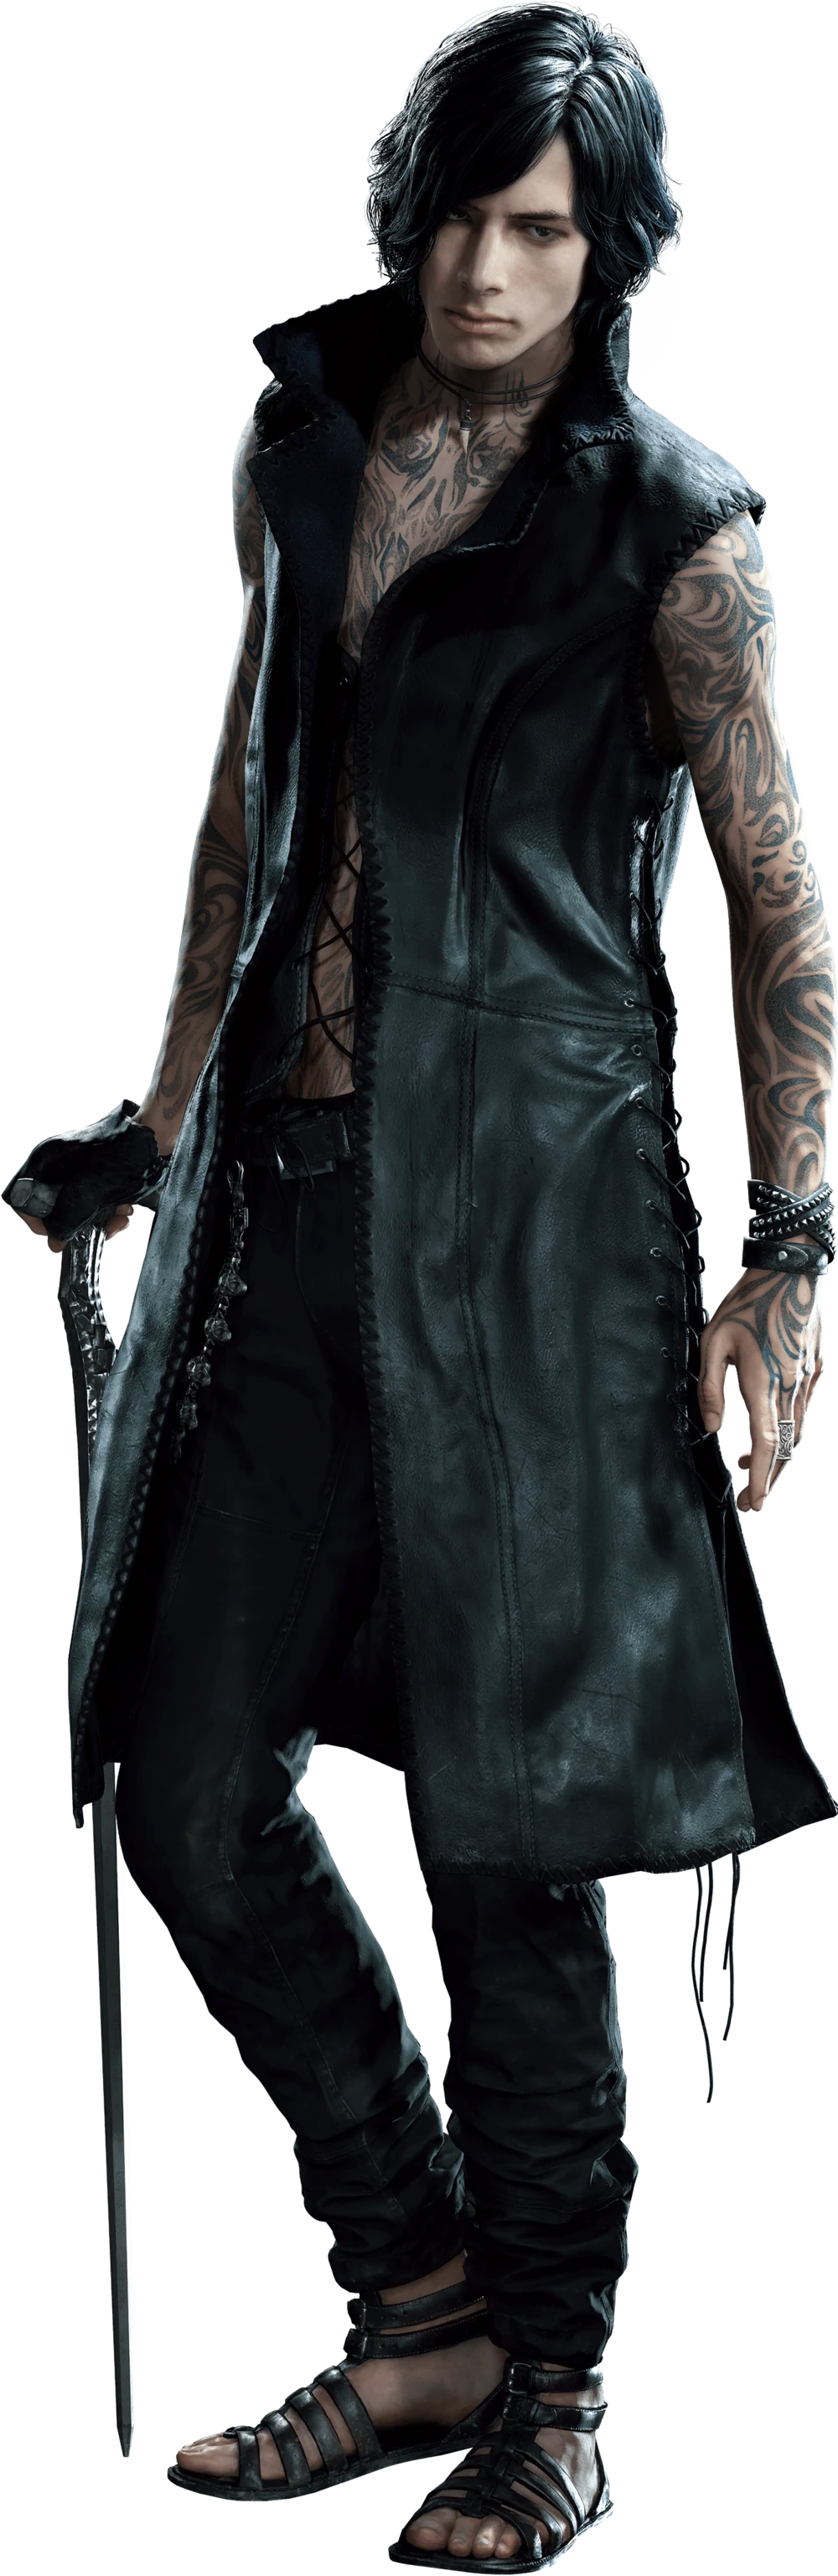 Devil May Cry 5, Mysterious V